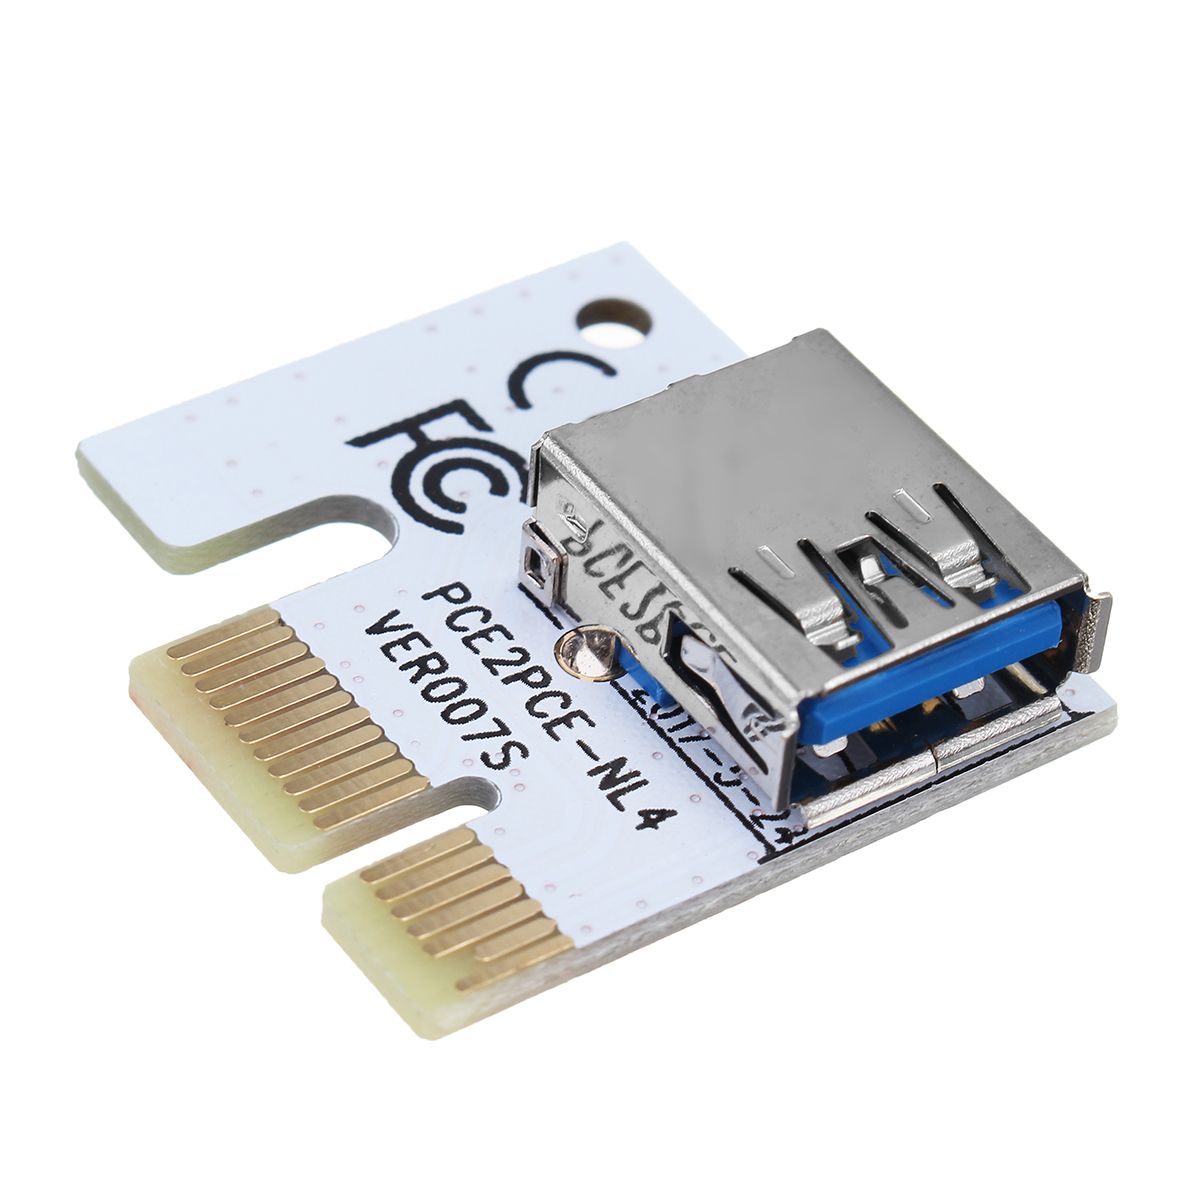 VER-008S-USB30-PCI-E-Express-1x-to-16x-Extension-Cable-Extender-Riser-Card-For-8-GPU-Graphics-Cards-1236715